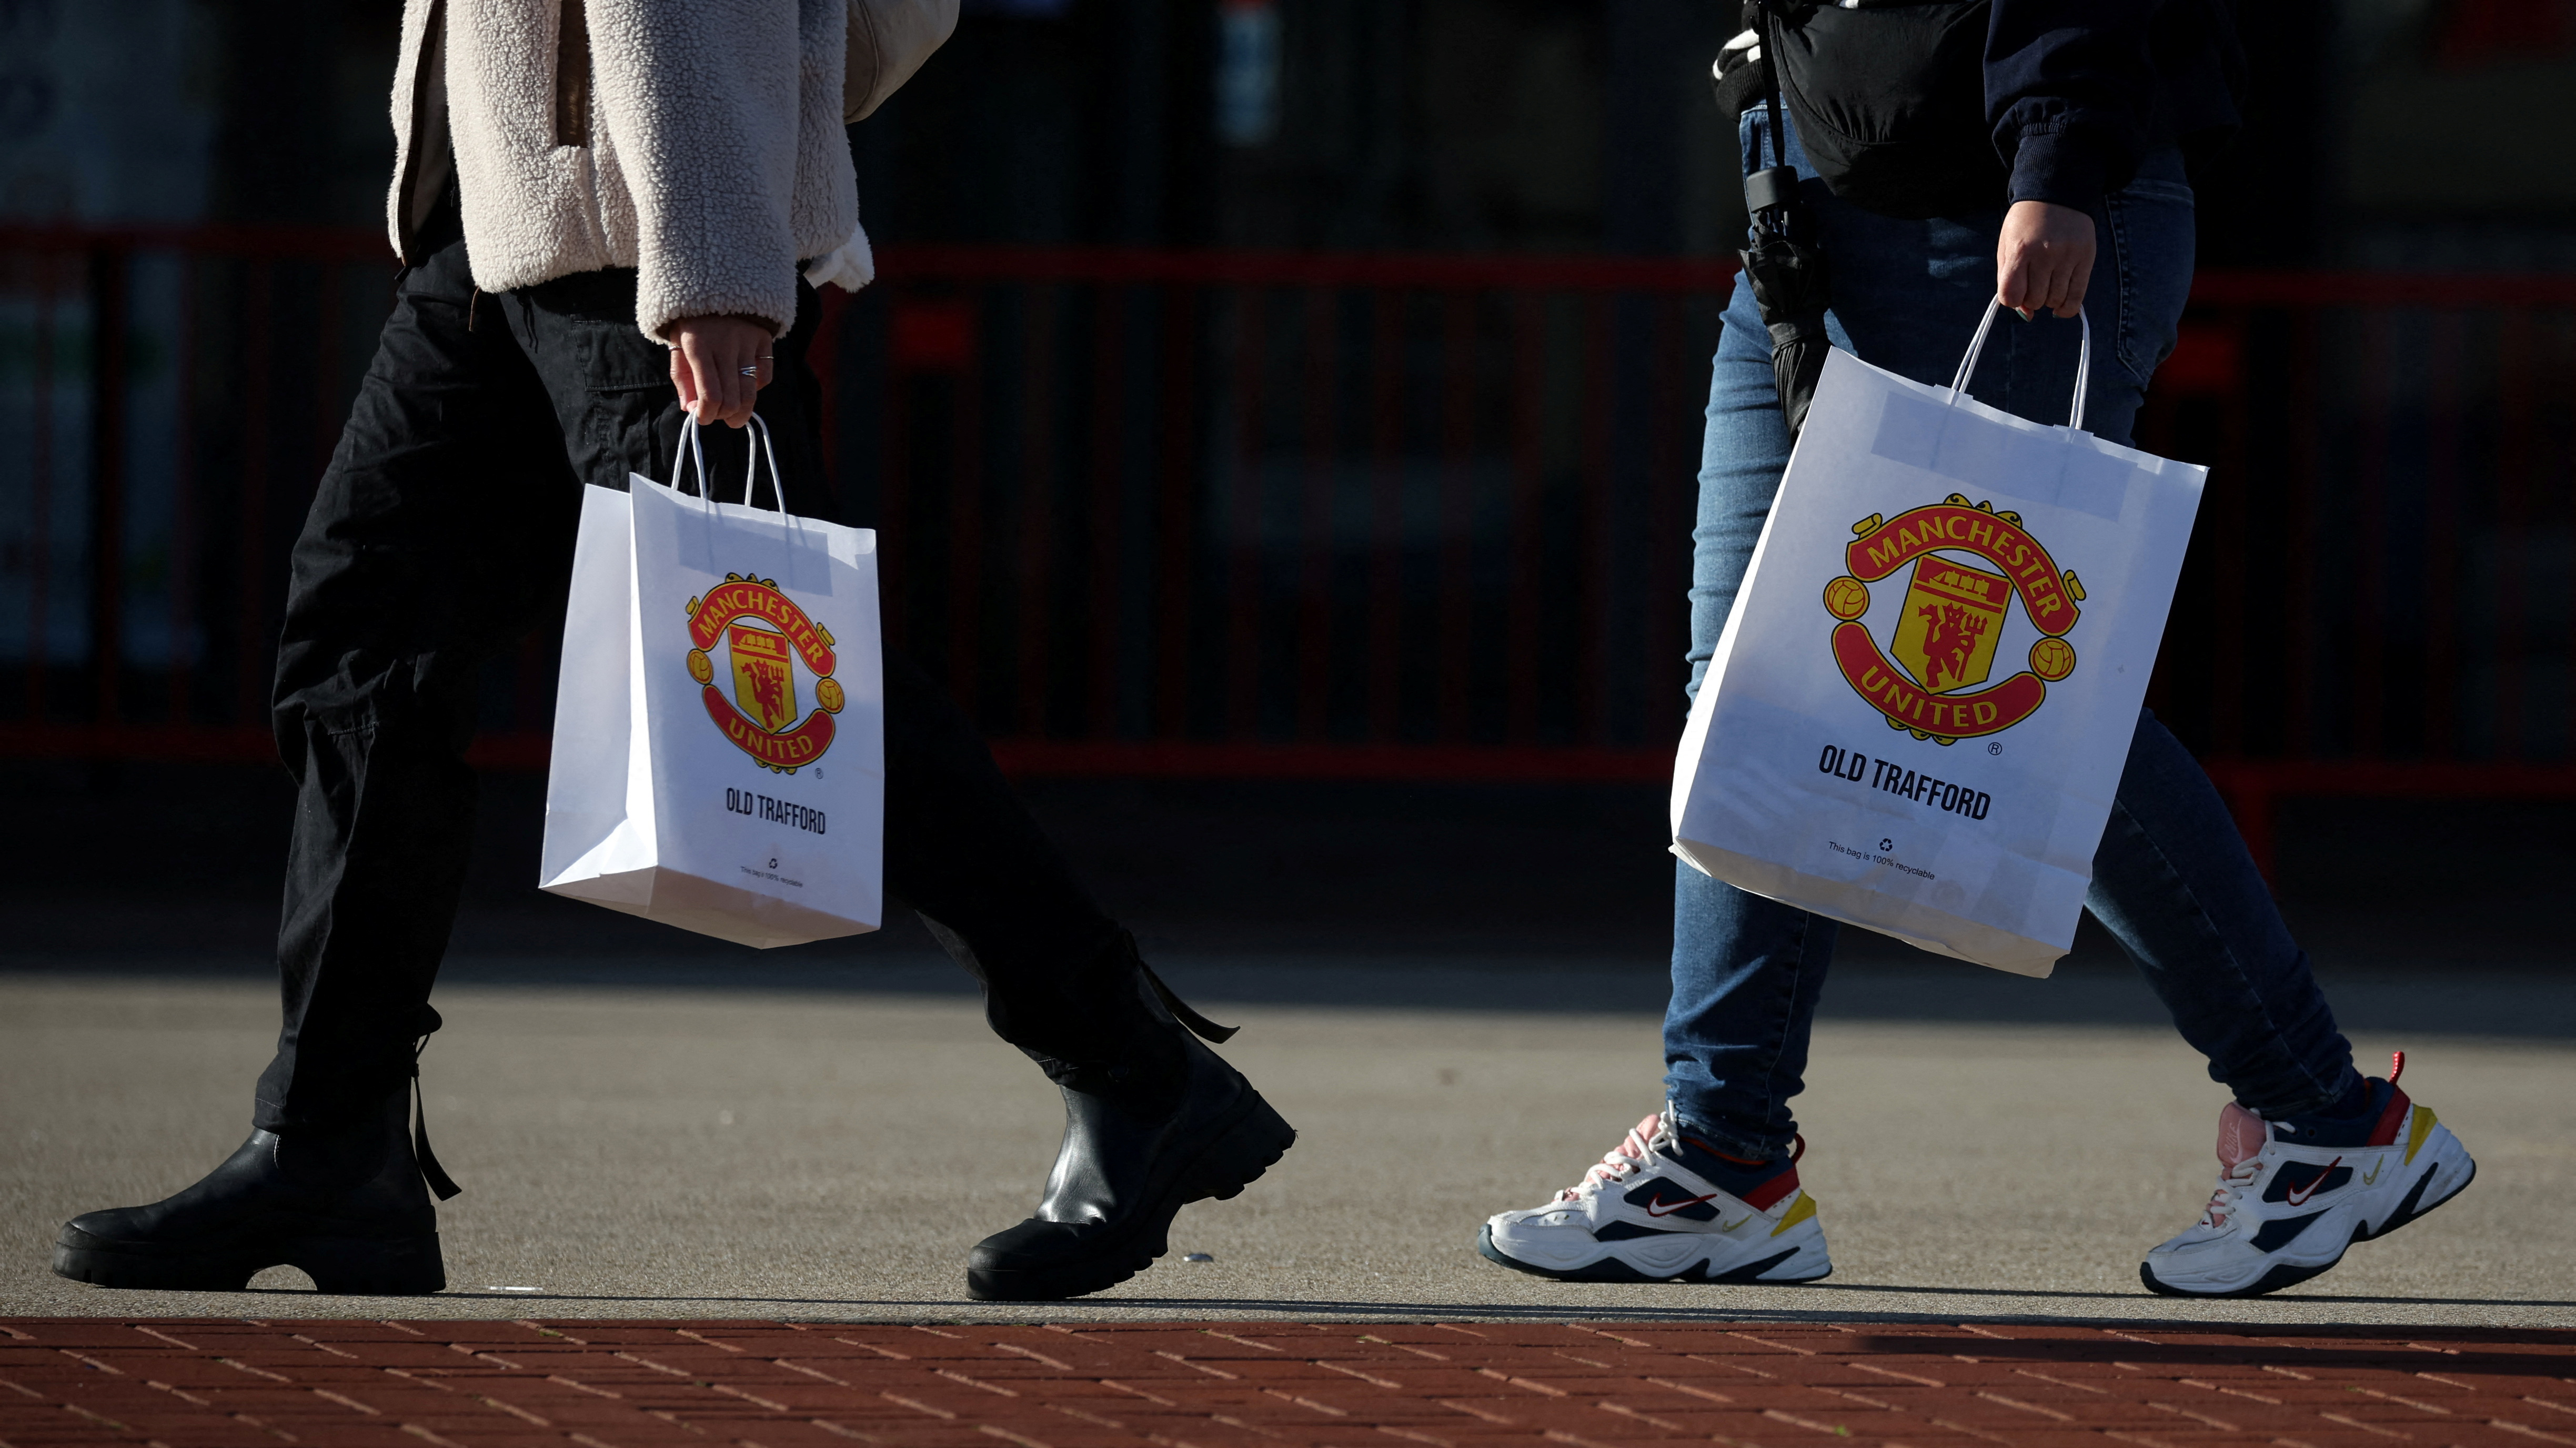 People with Manchester United bags outside Old Trafford stadium